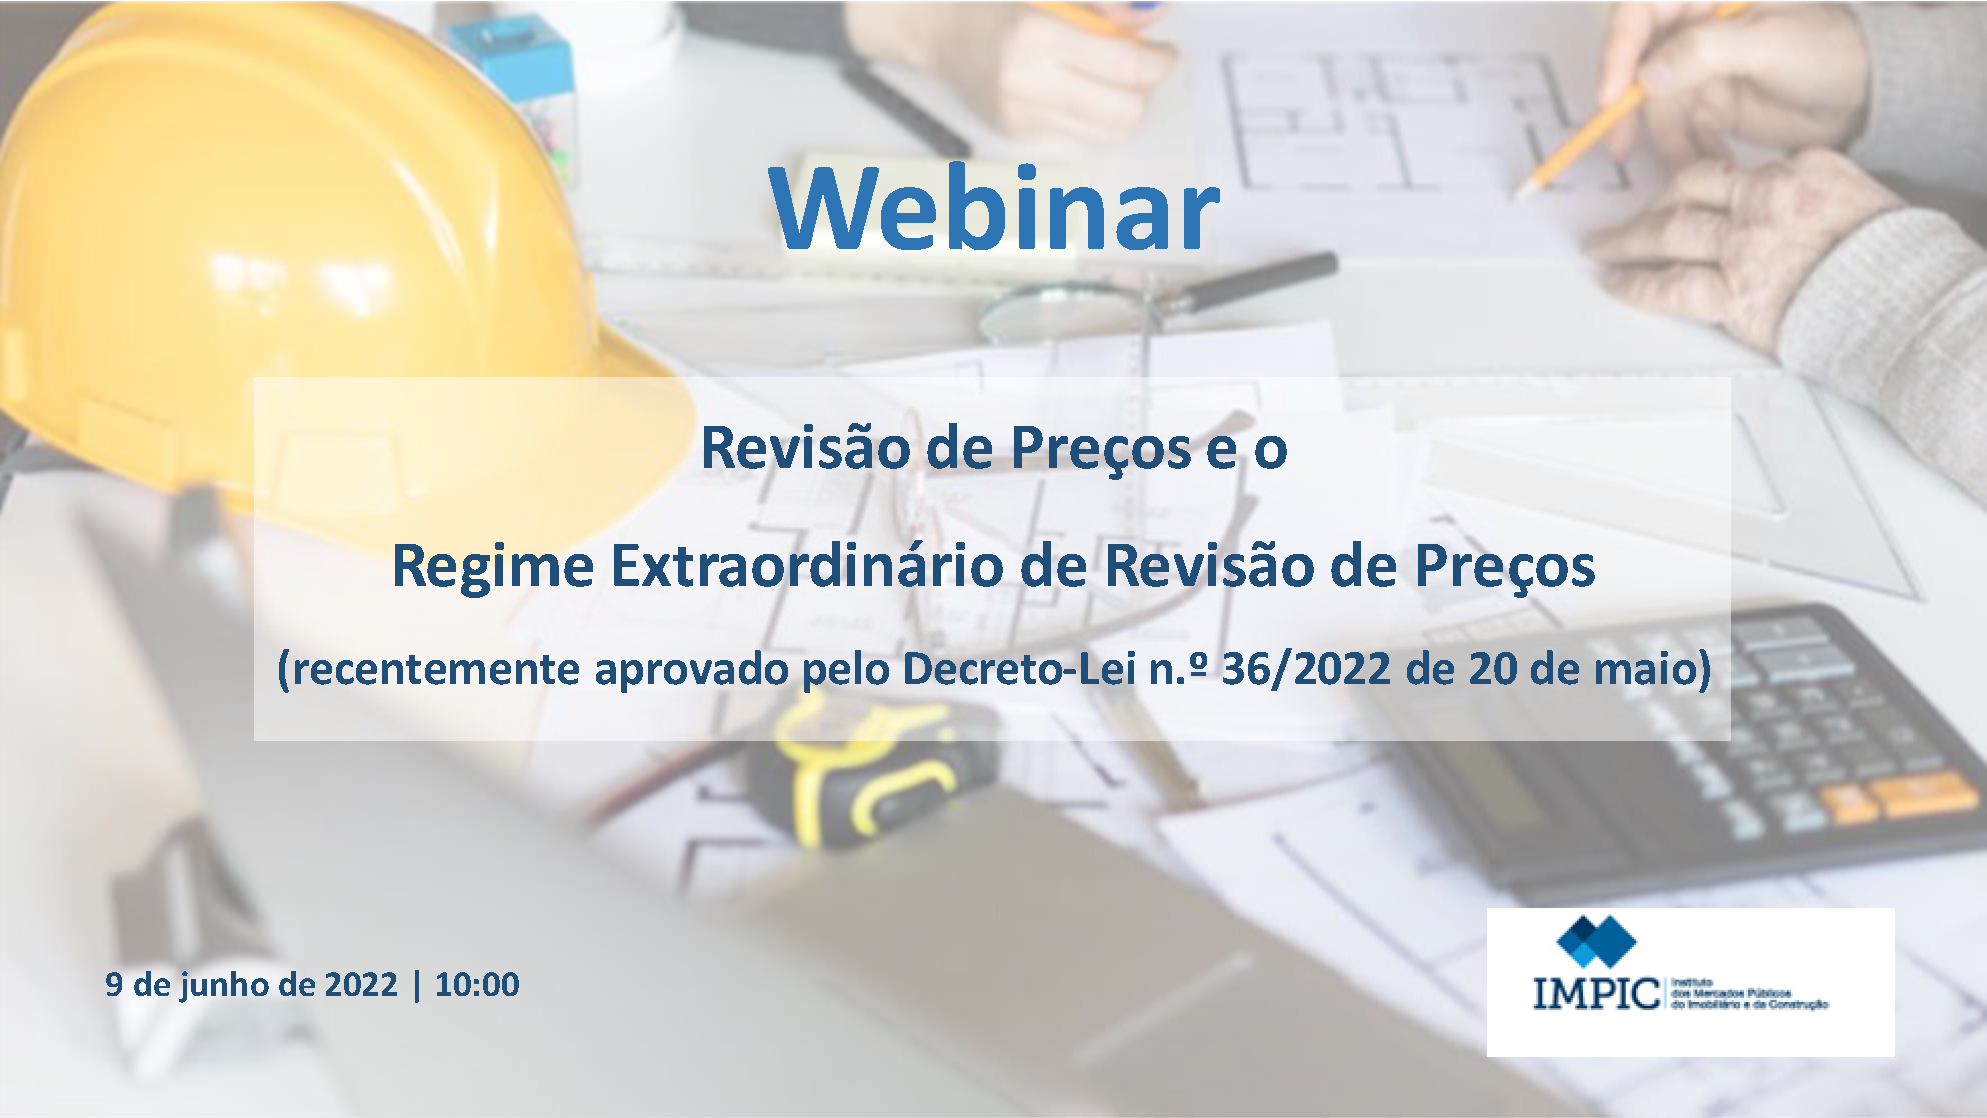 http://www.impic.pt/impic/assets/misc/img/noticias/webinar_revisao_extraordinaria.png